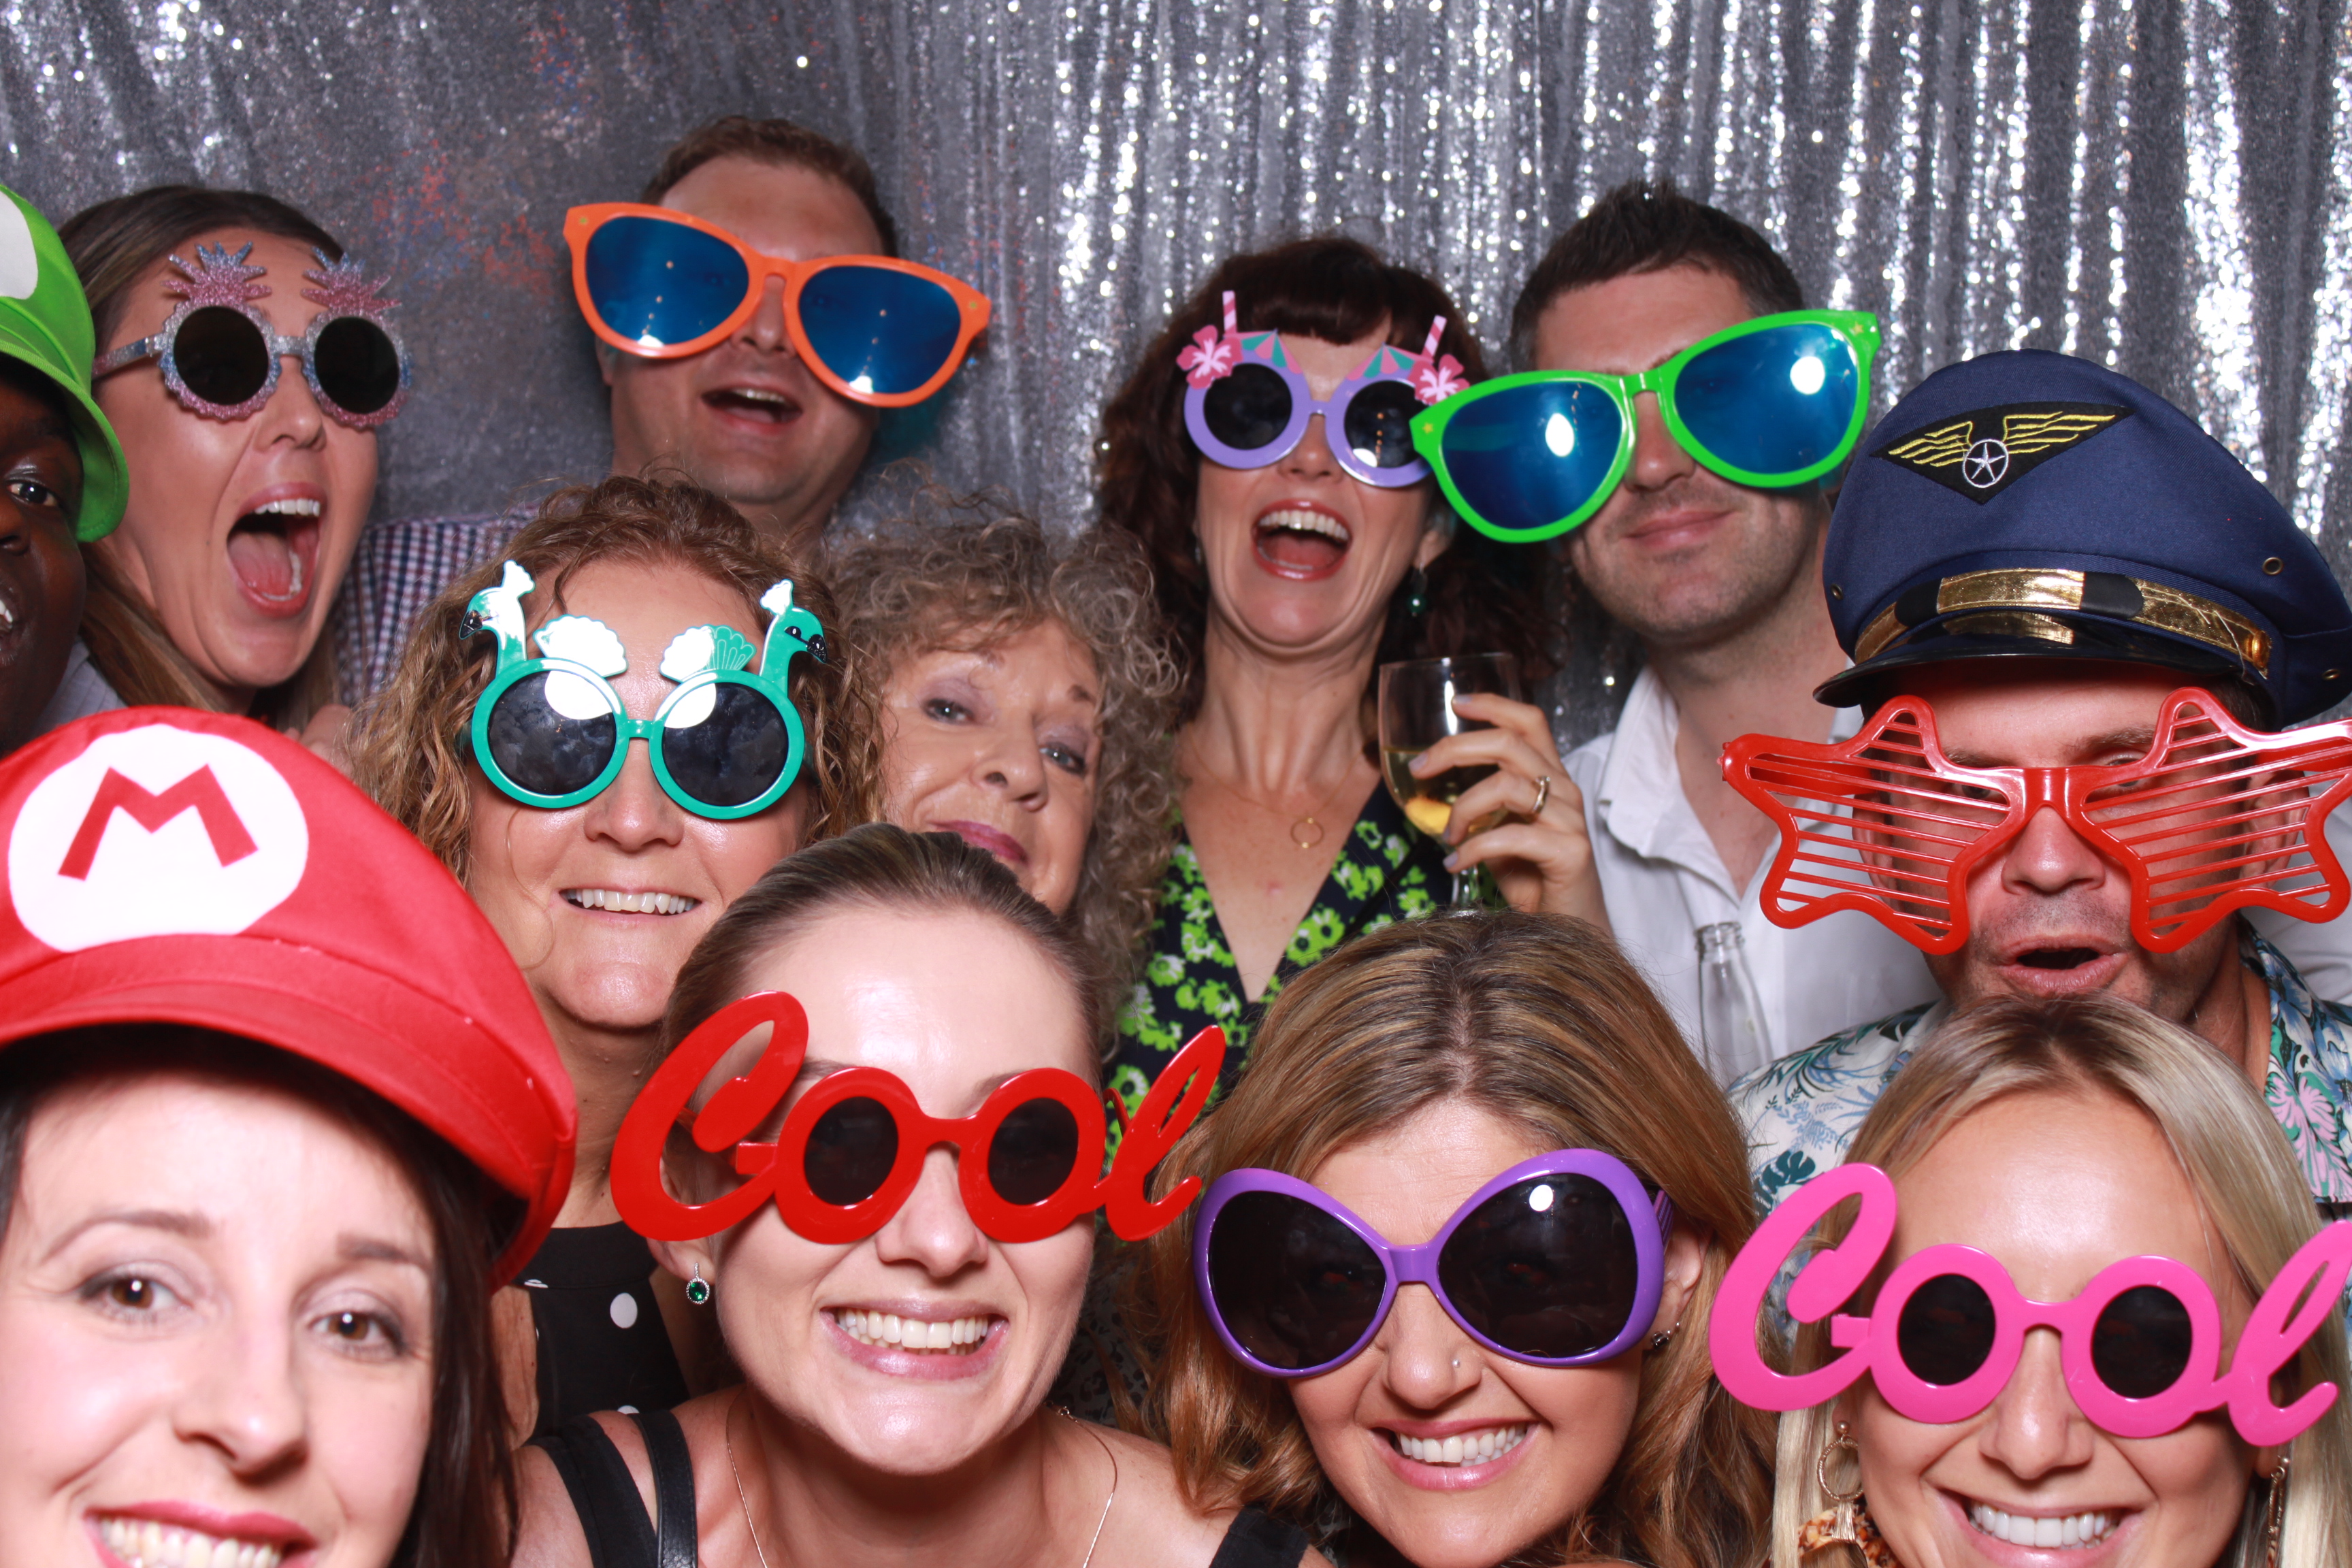 What is an open air photo booth?